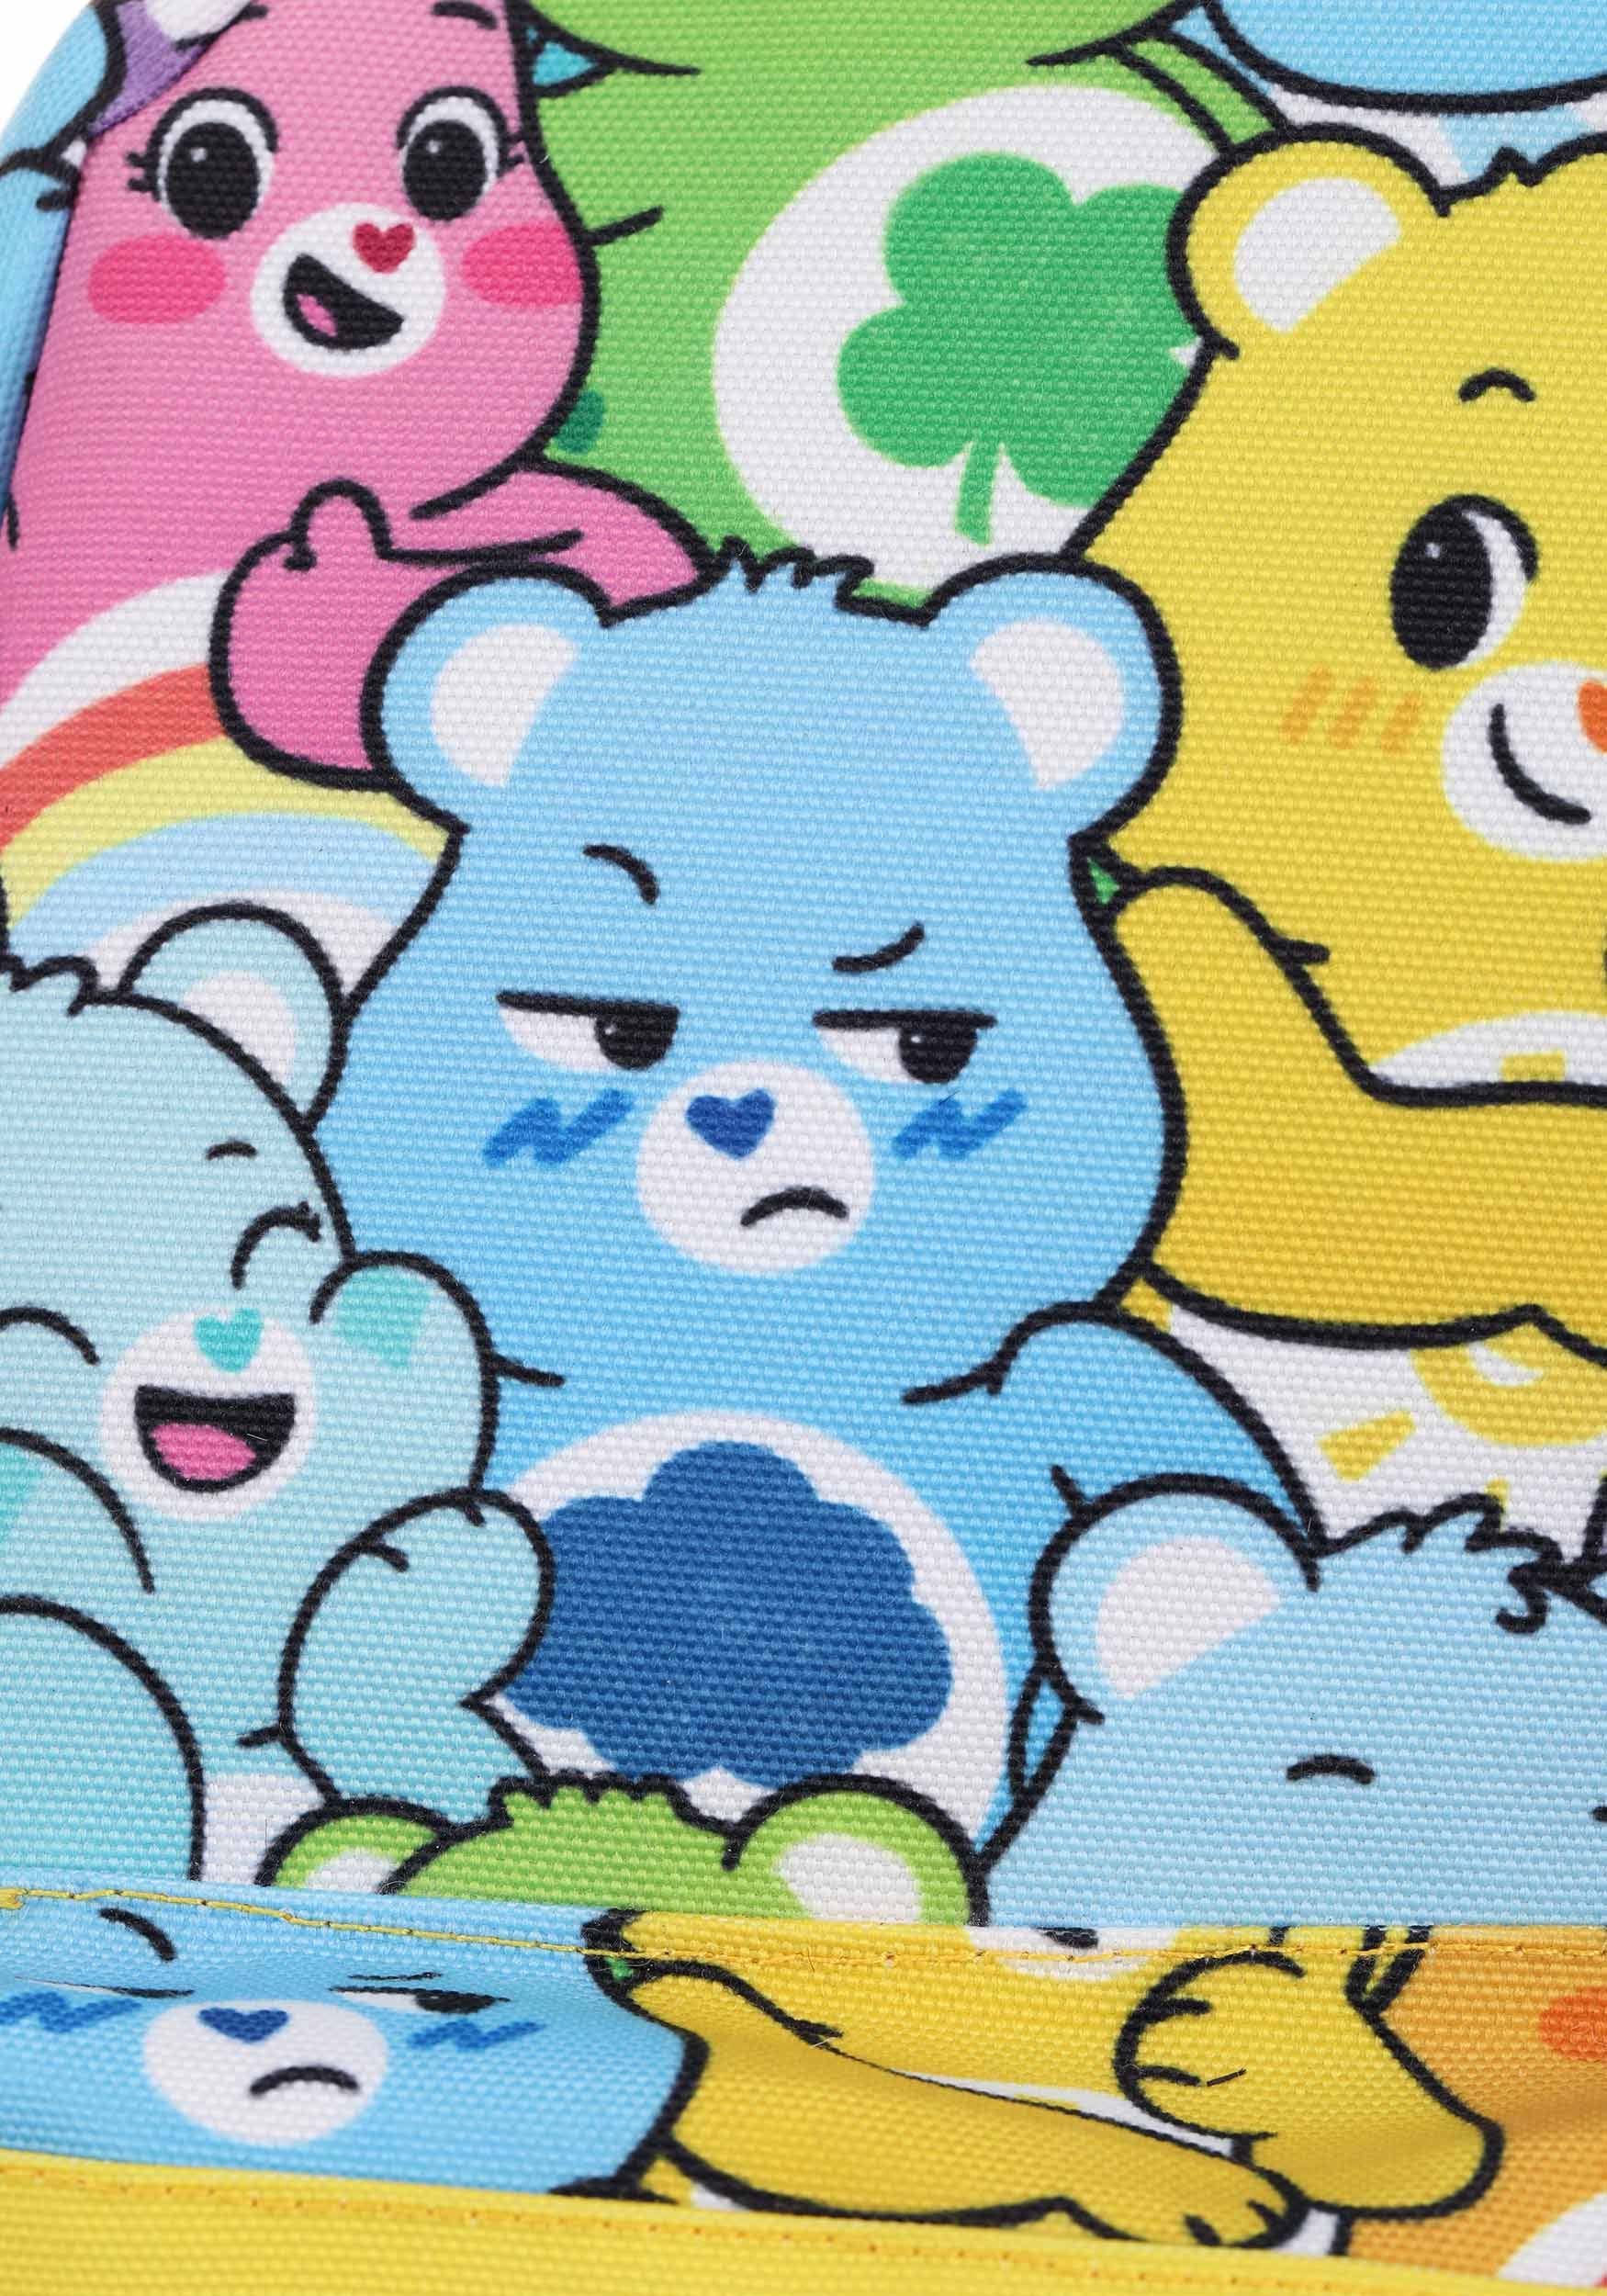 Care Bears All Over Print Backpack , Care Bears Accessories